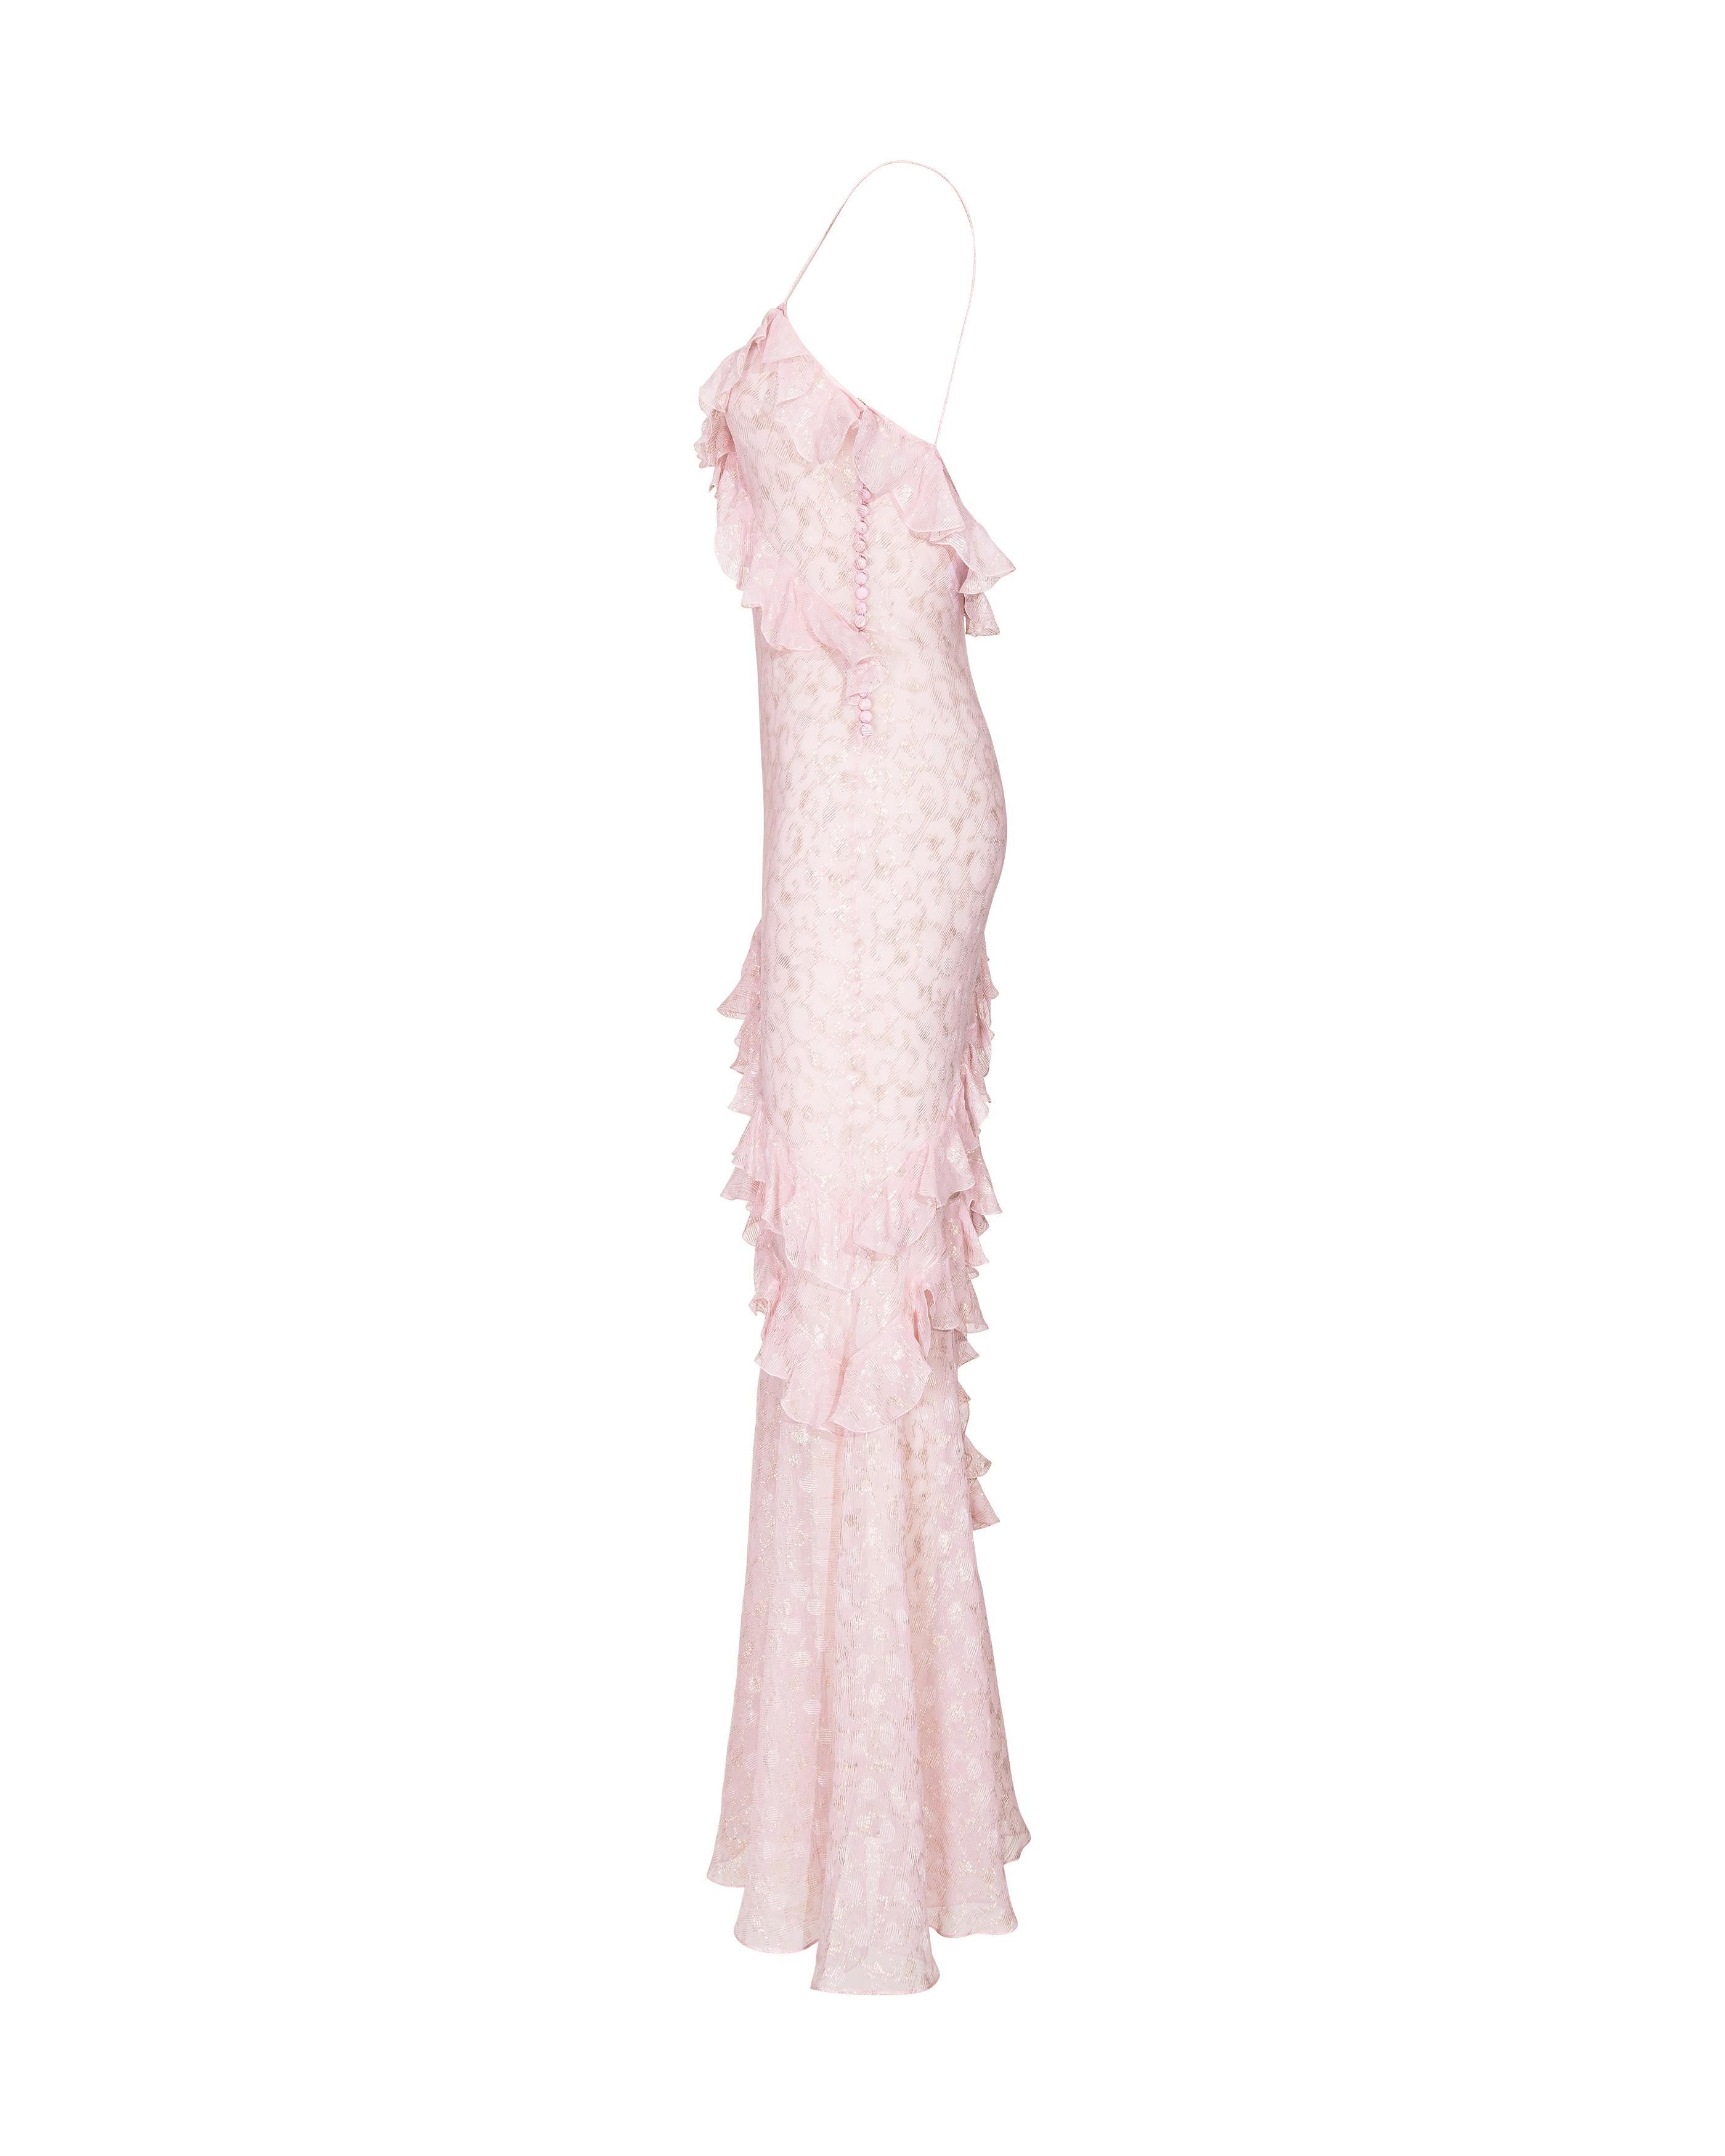 Women's S/S 2004 Christian Dior by John Galliano Sheer Pink and Gold Ruffle Gown